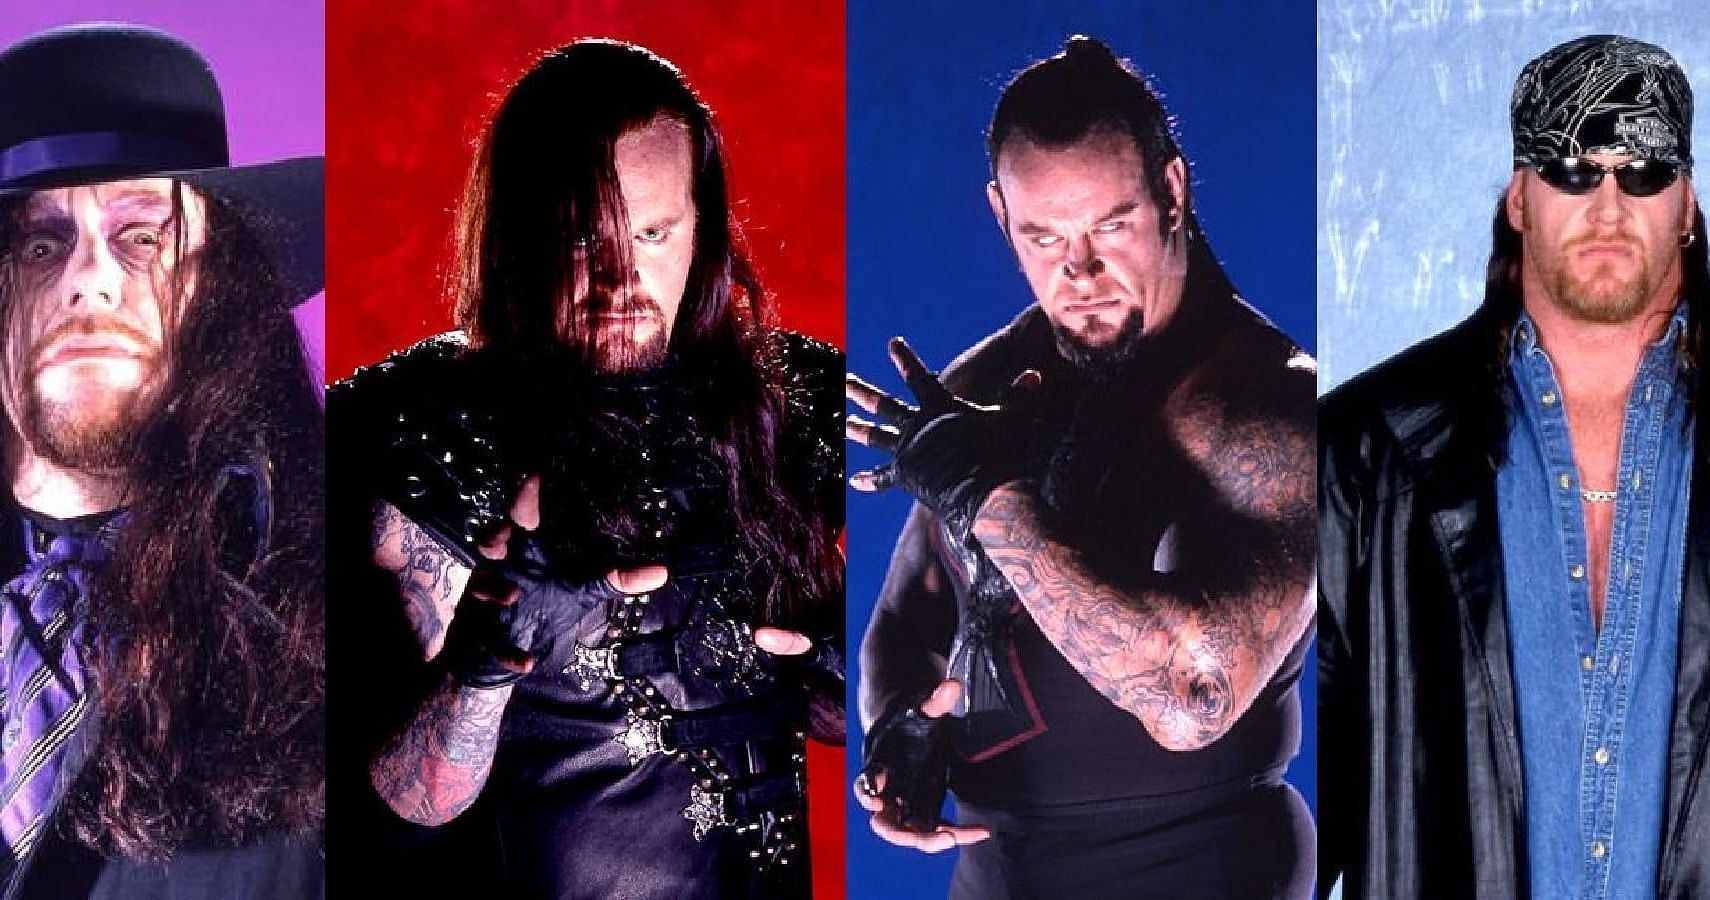 The Deadman has achieved so much in his illustrious WWE career, but there are a few things you may not know about his character.